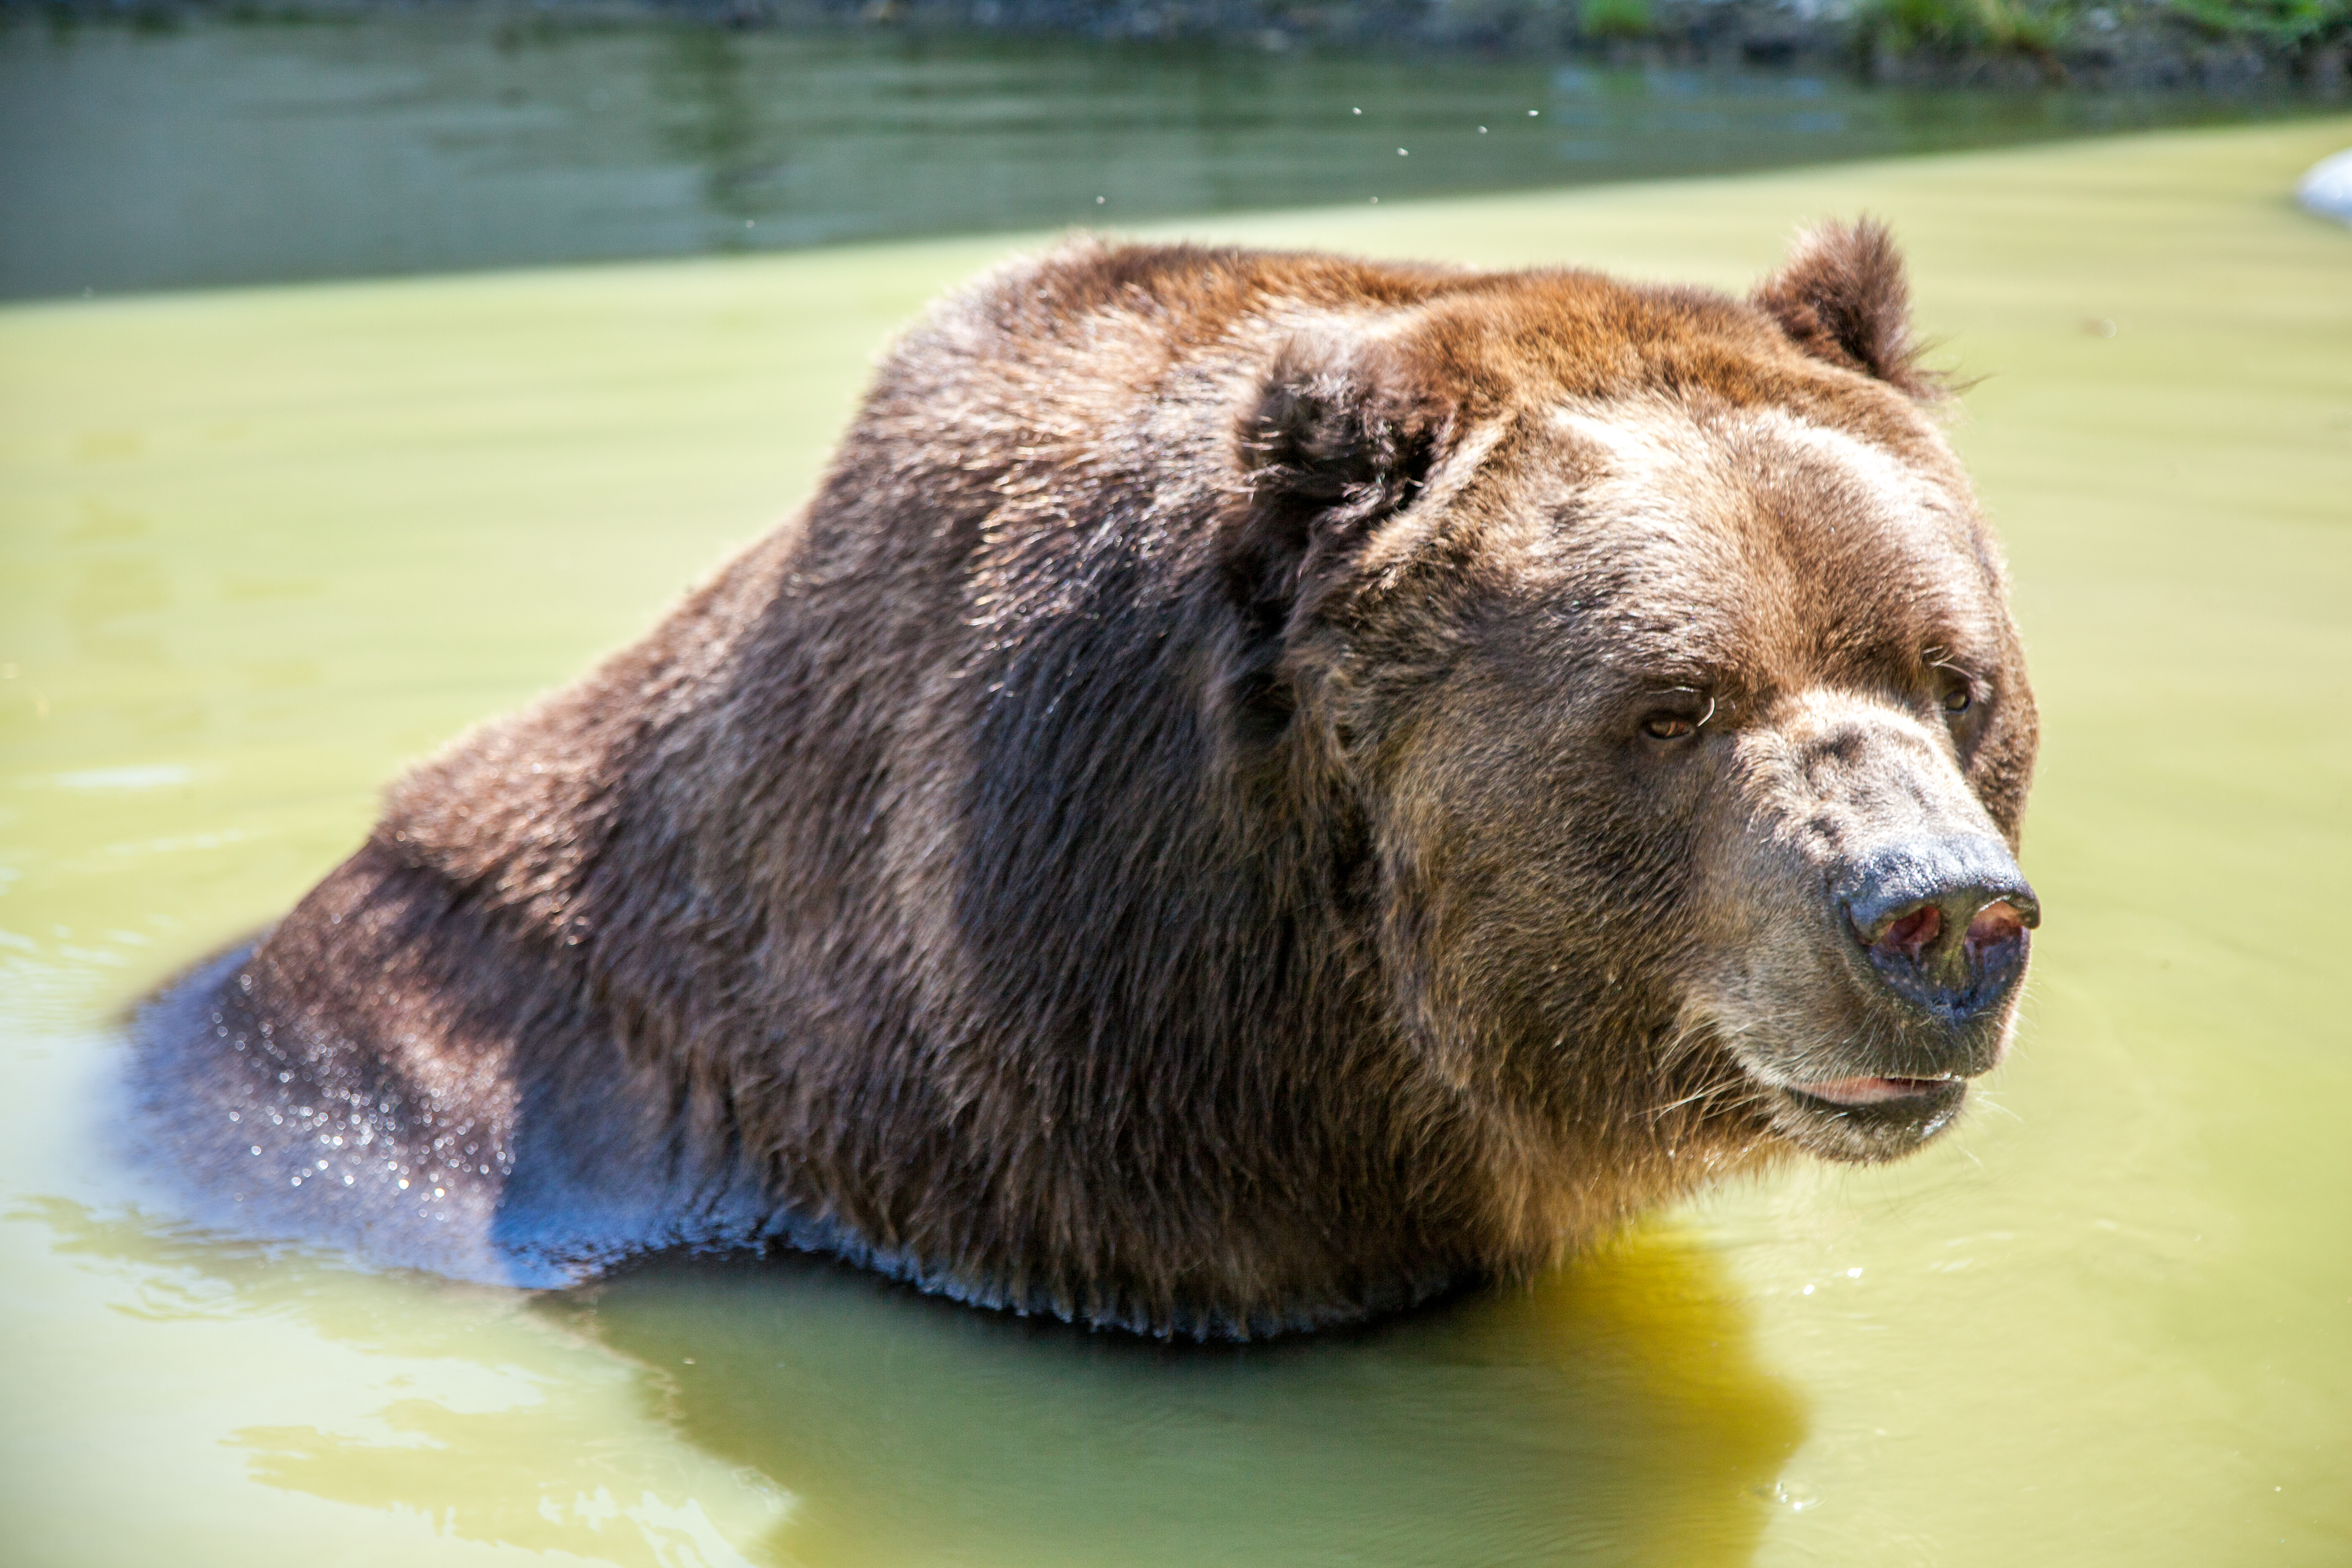 Jimbo, a 22-year-old Kodiak bear Jimbo swimming in a pond in an enclosure at the Orphaned Wildlife Center in Otisville on Sept. 7, 2016 (James Smith)